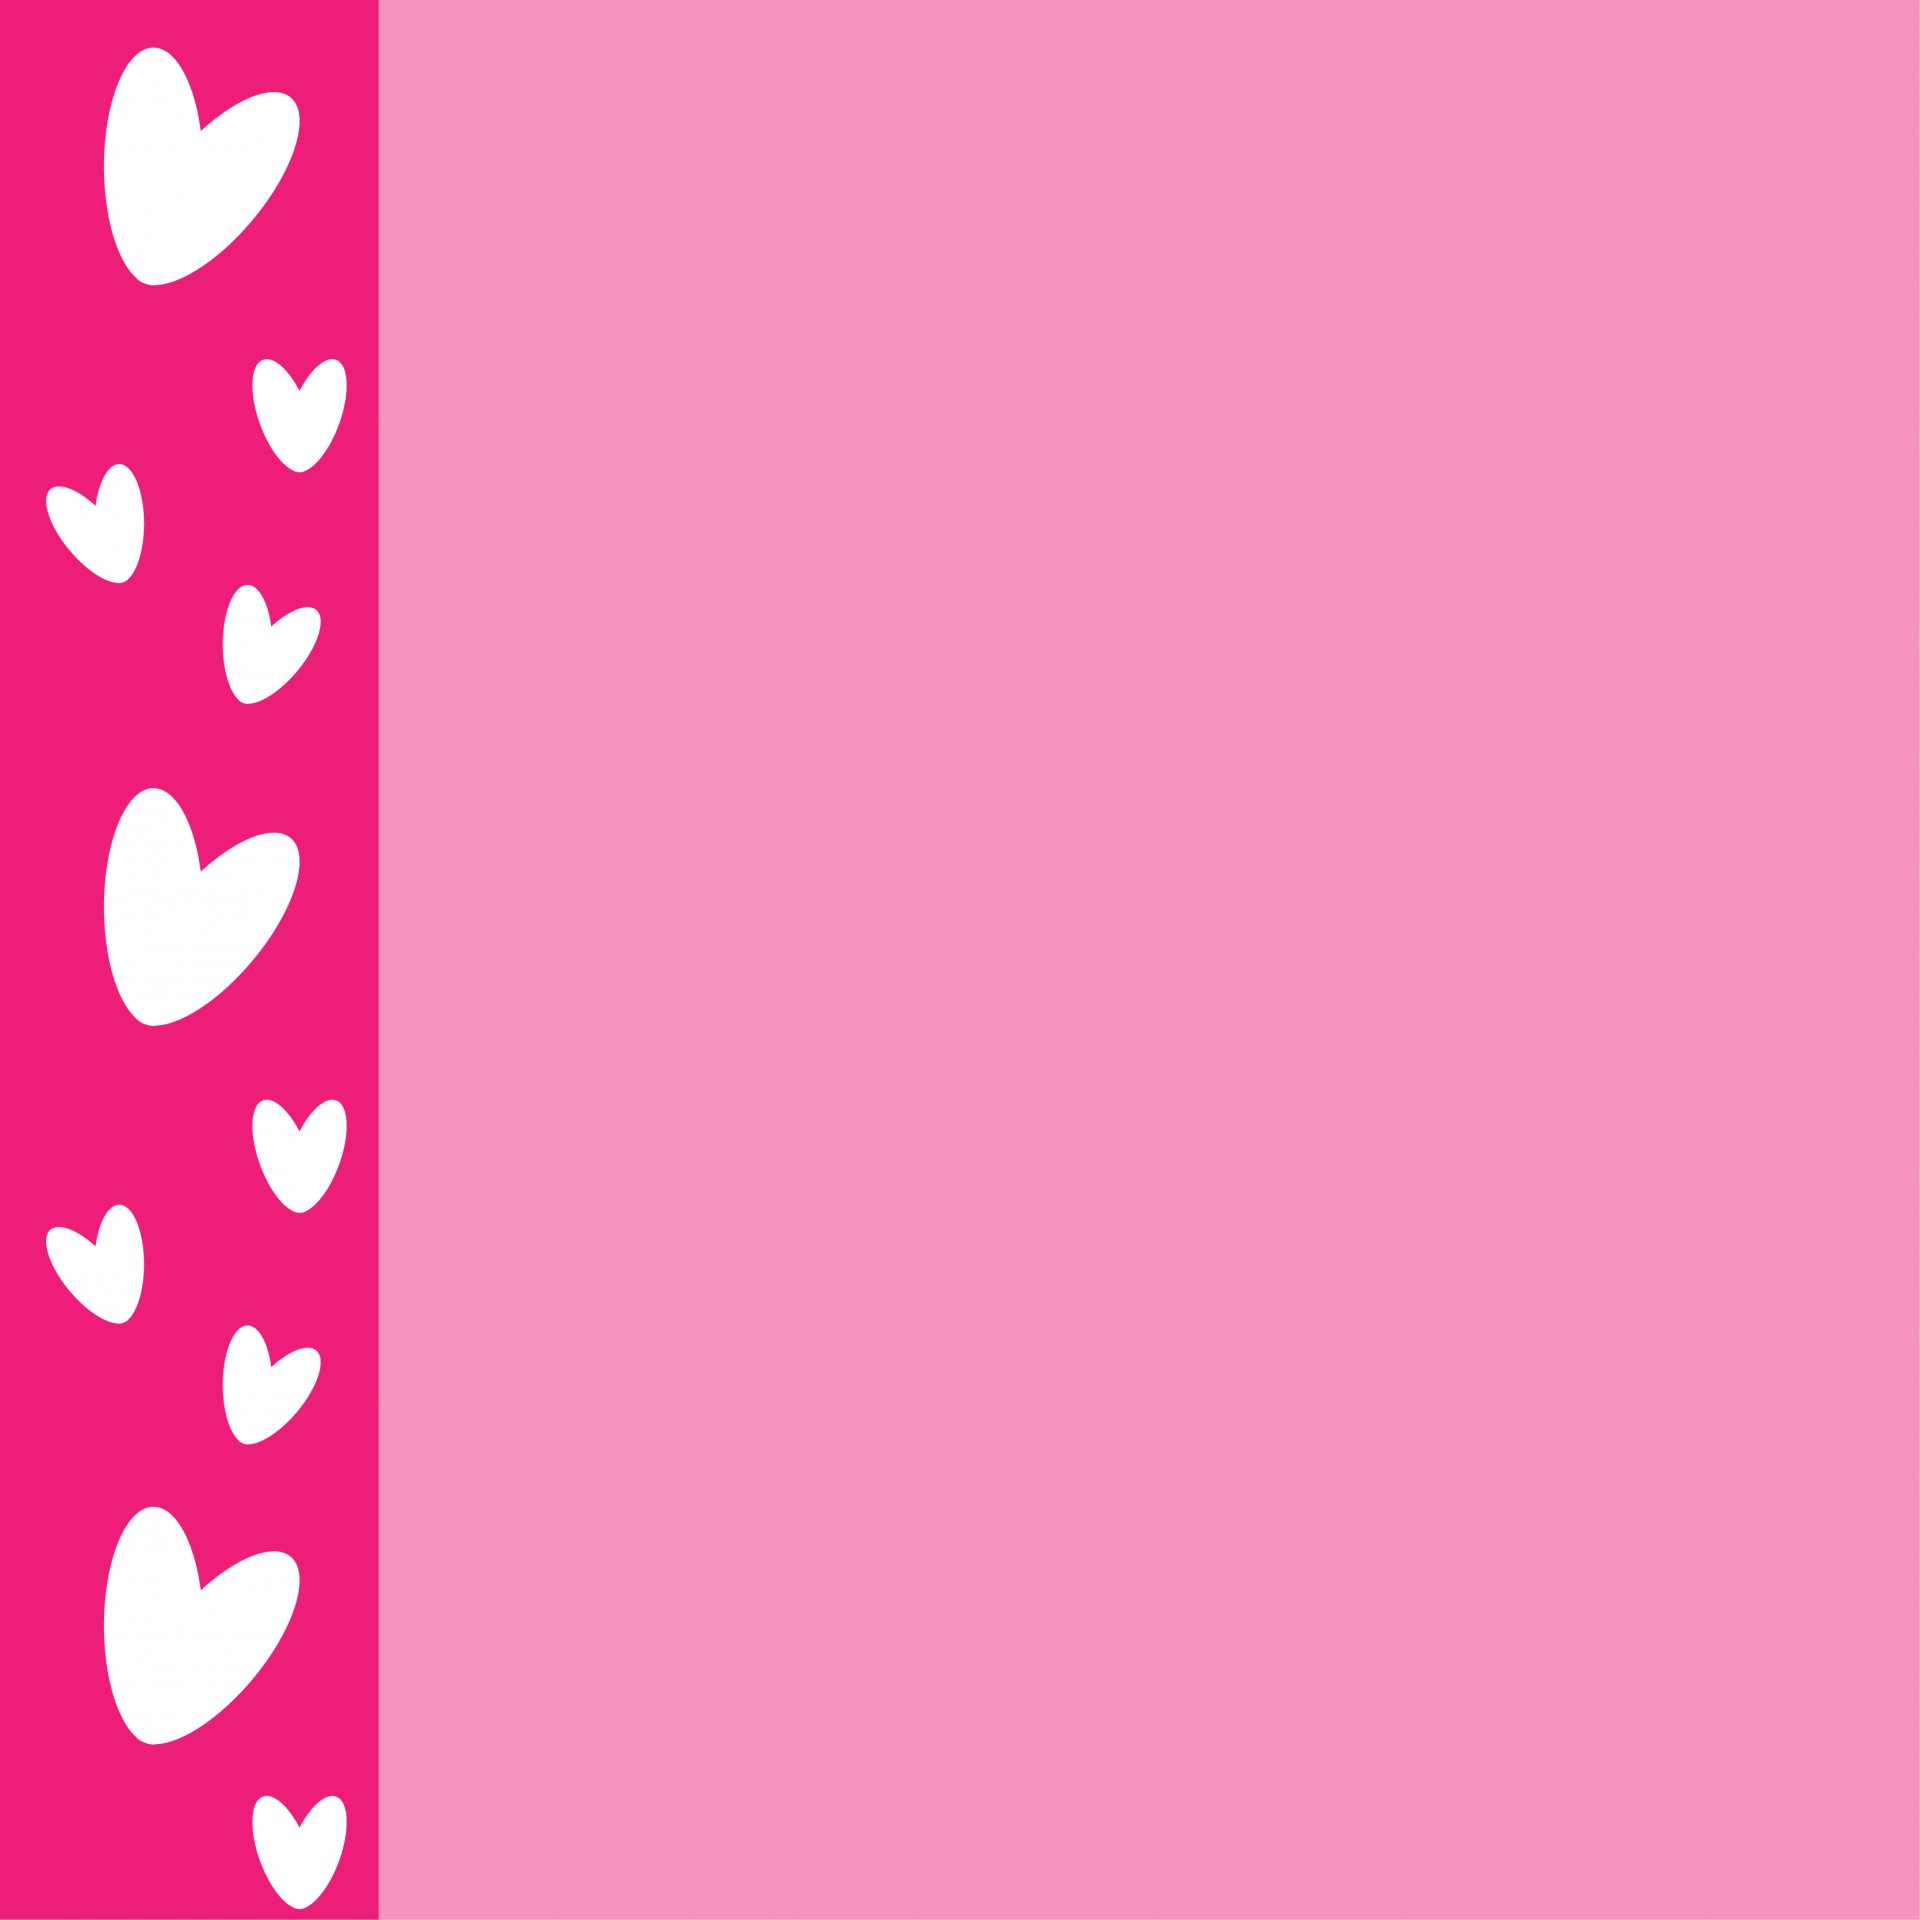 Pink Hearts Card Free Stock Photo - Public Domain Pictures